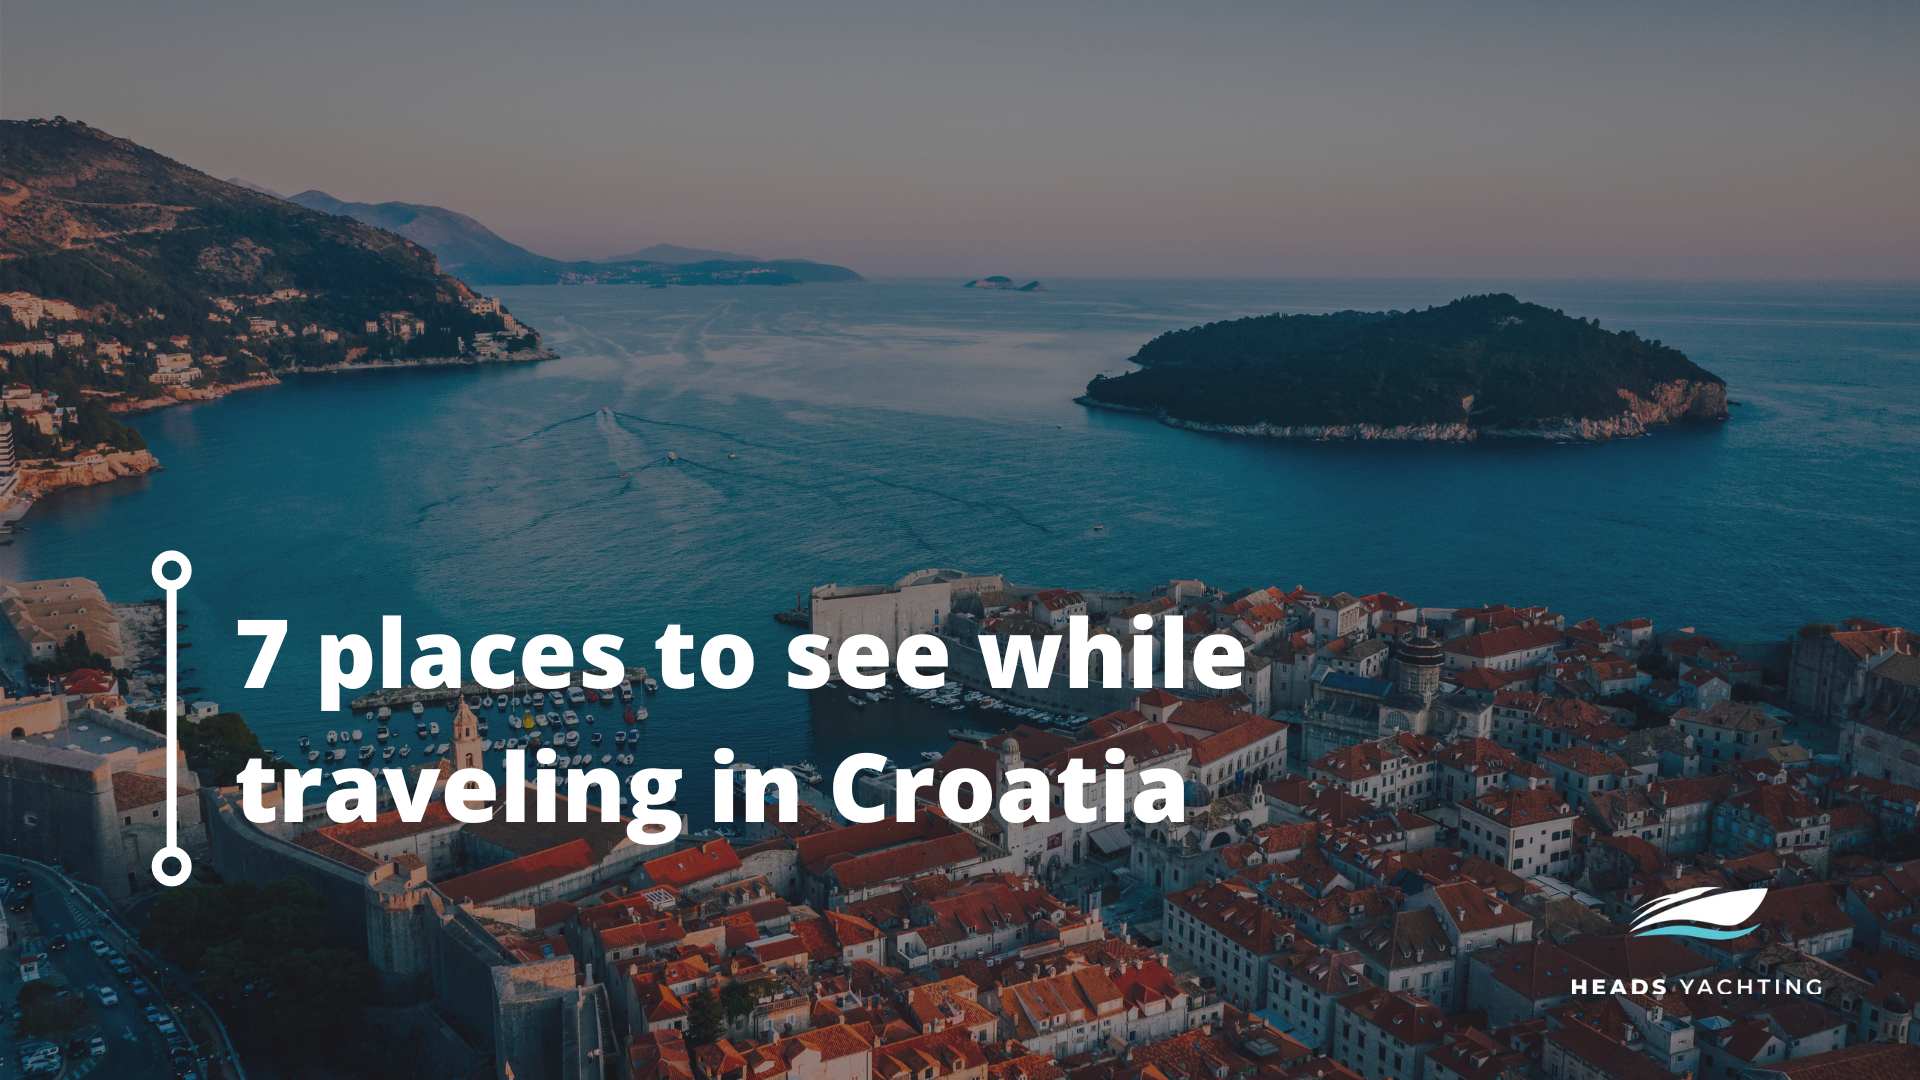 7 places to see when traveling by yacht in Croatia